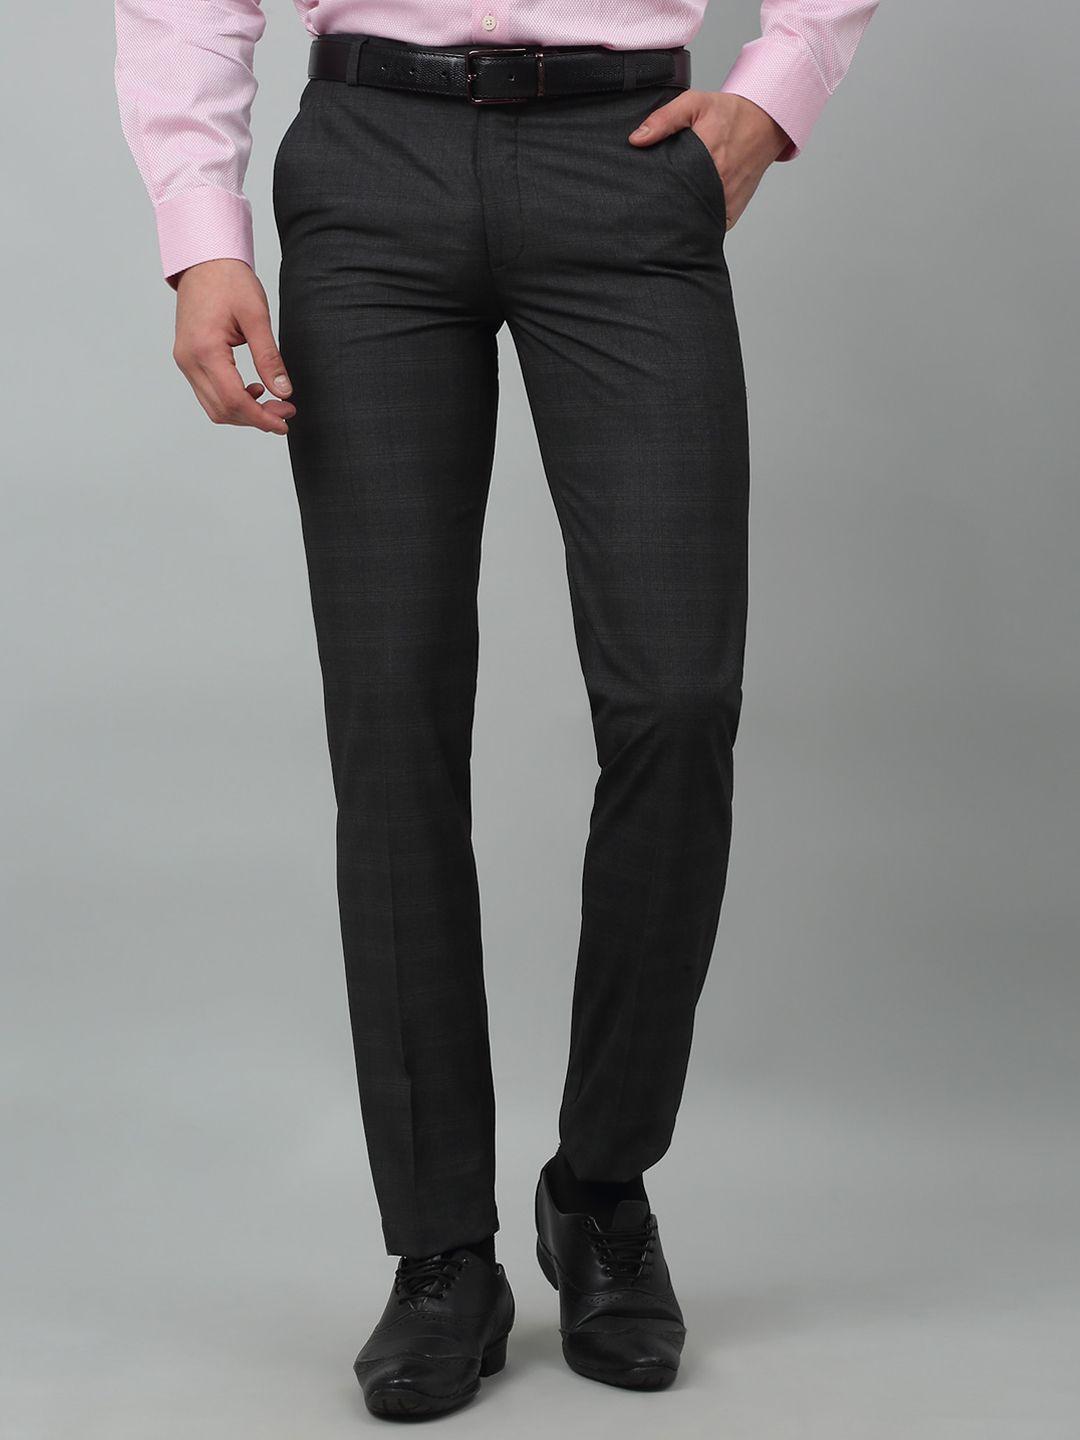 cantabil checked mid rise cotton formal trousers